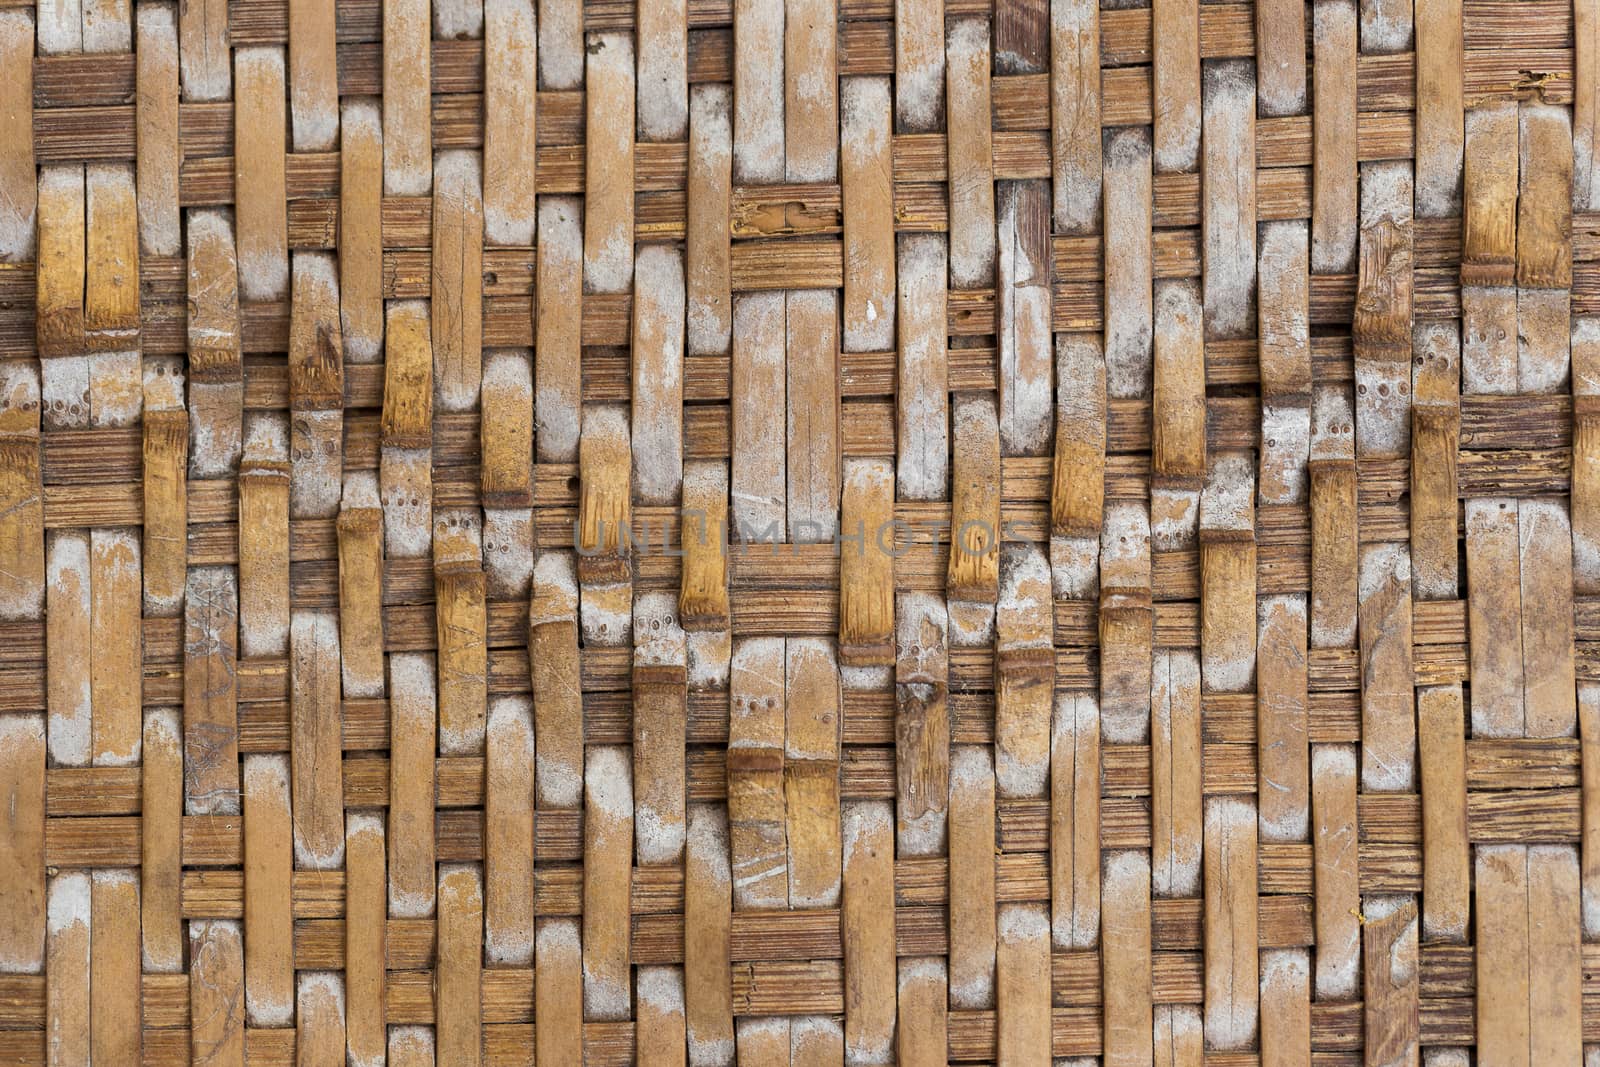 Retro bamboo weave pattern texture background by kaiskynet